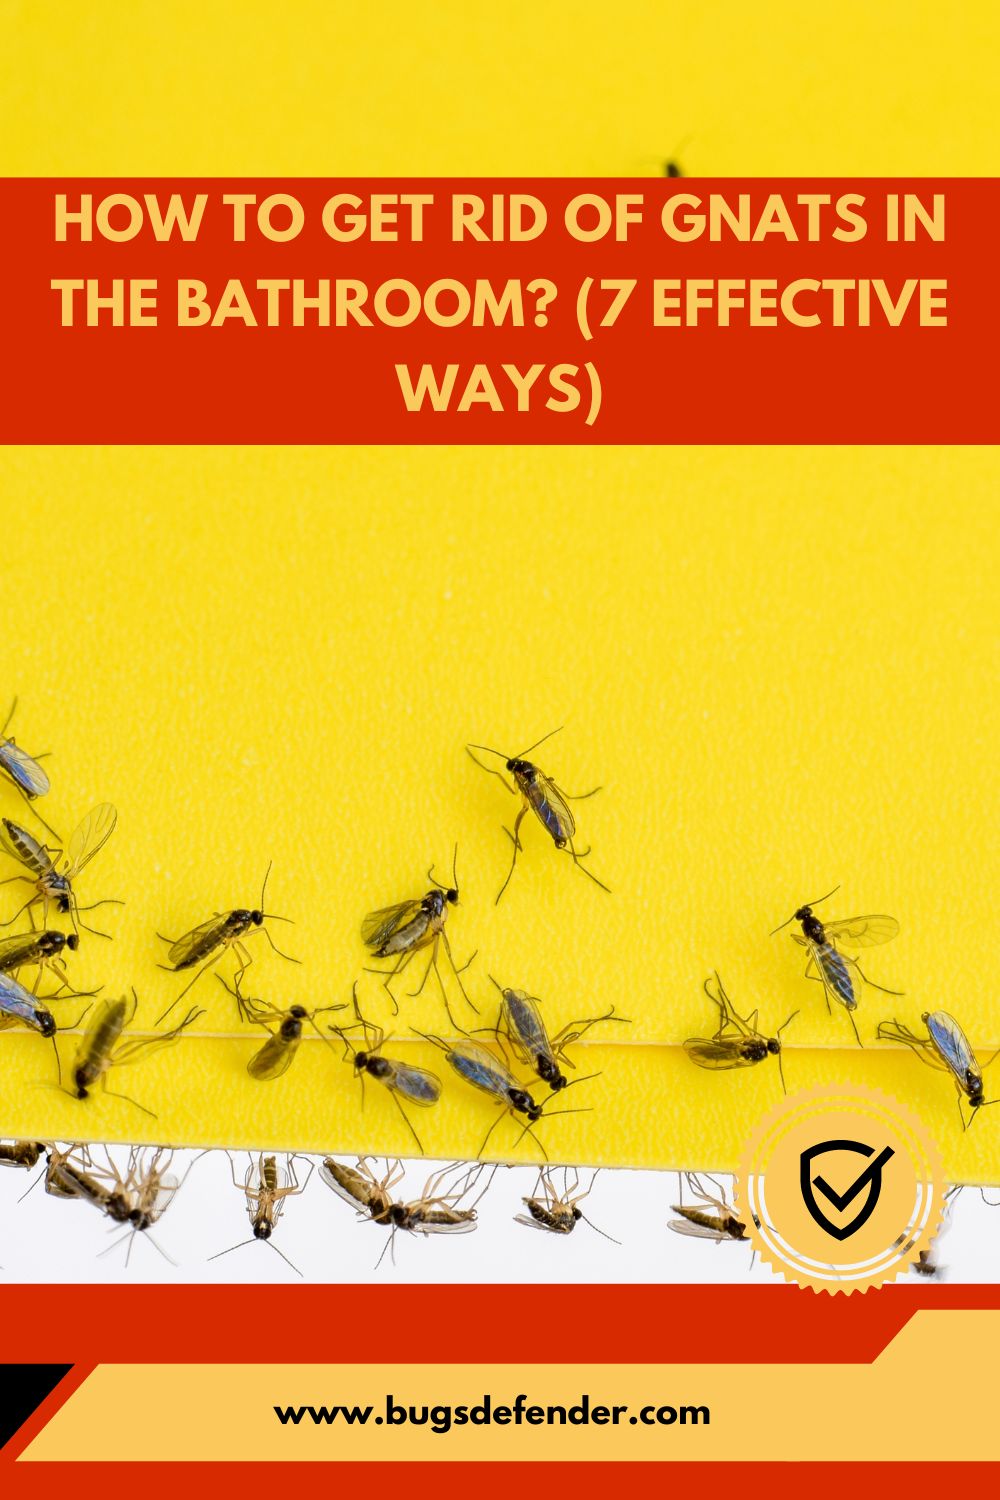 How to Get Rid of Gnats in the Bathroom pin1